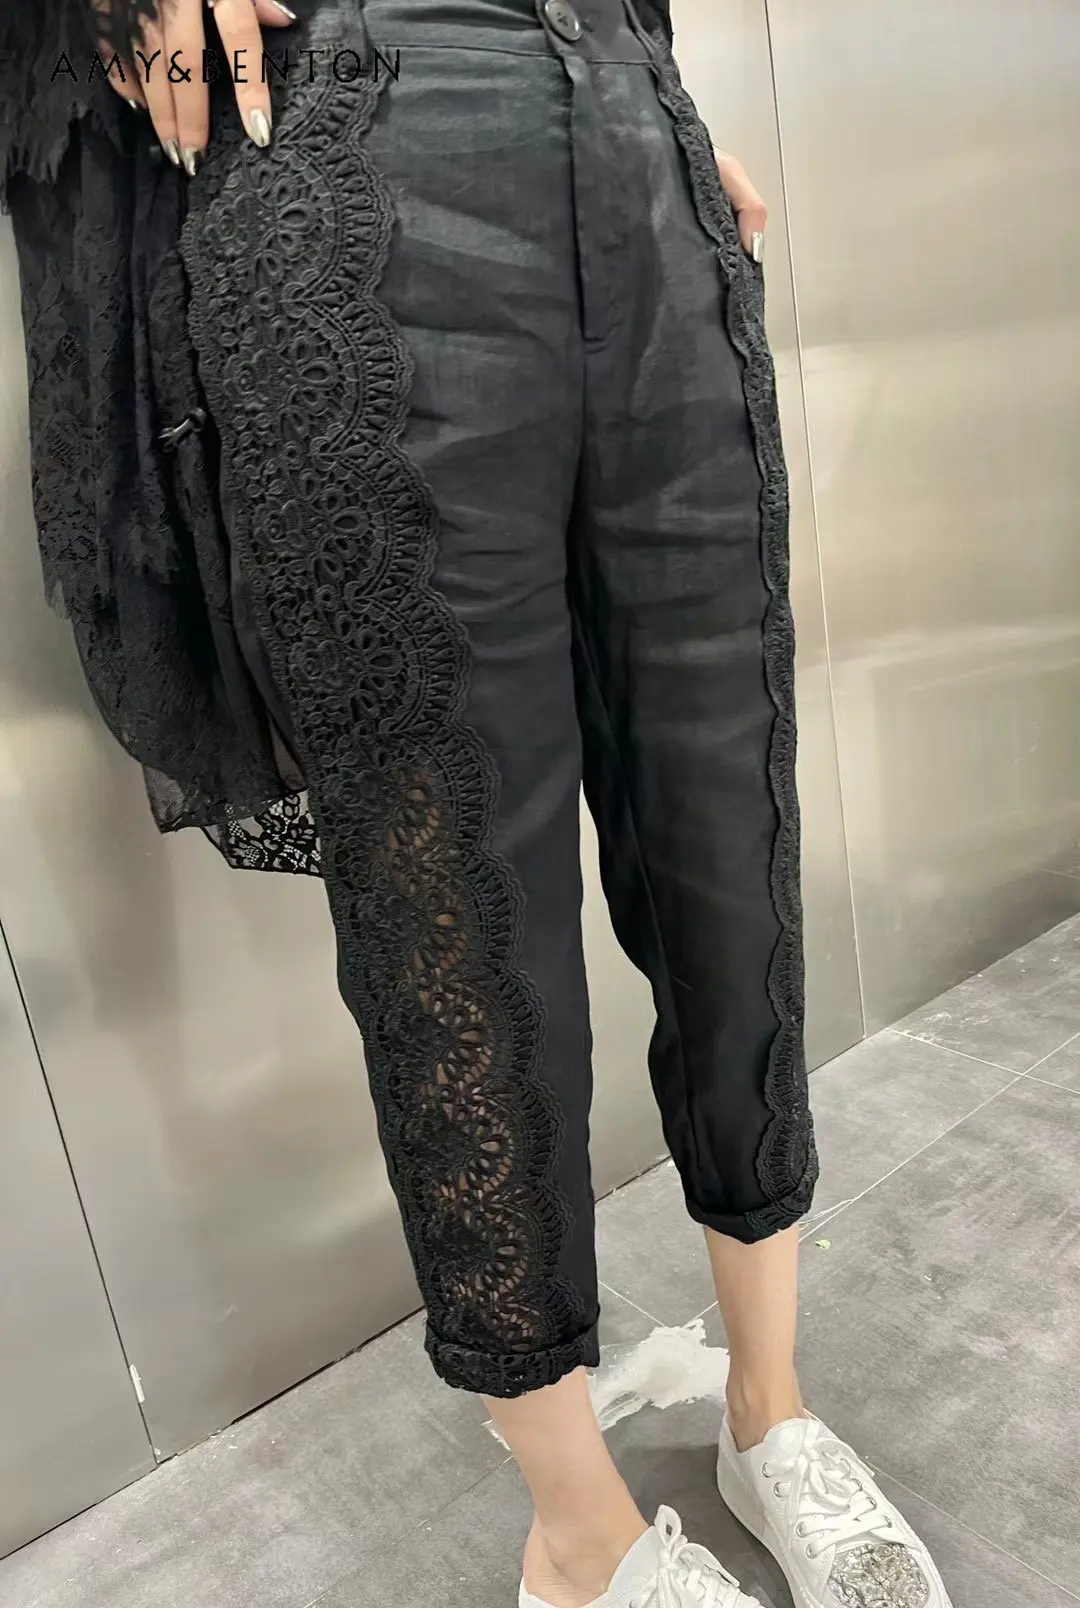 2023 Summer New European Goods Stitching Lace Casual Pants Women's Fashionable Stylish High Waist Slimming Cropped Pants